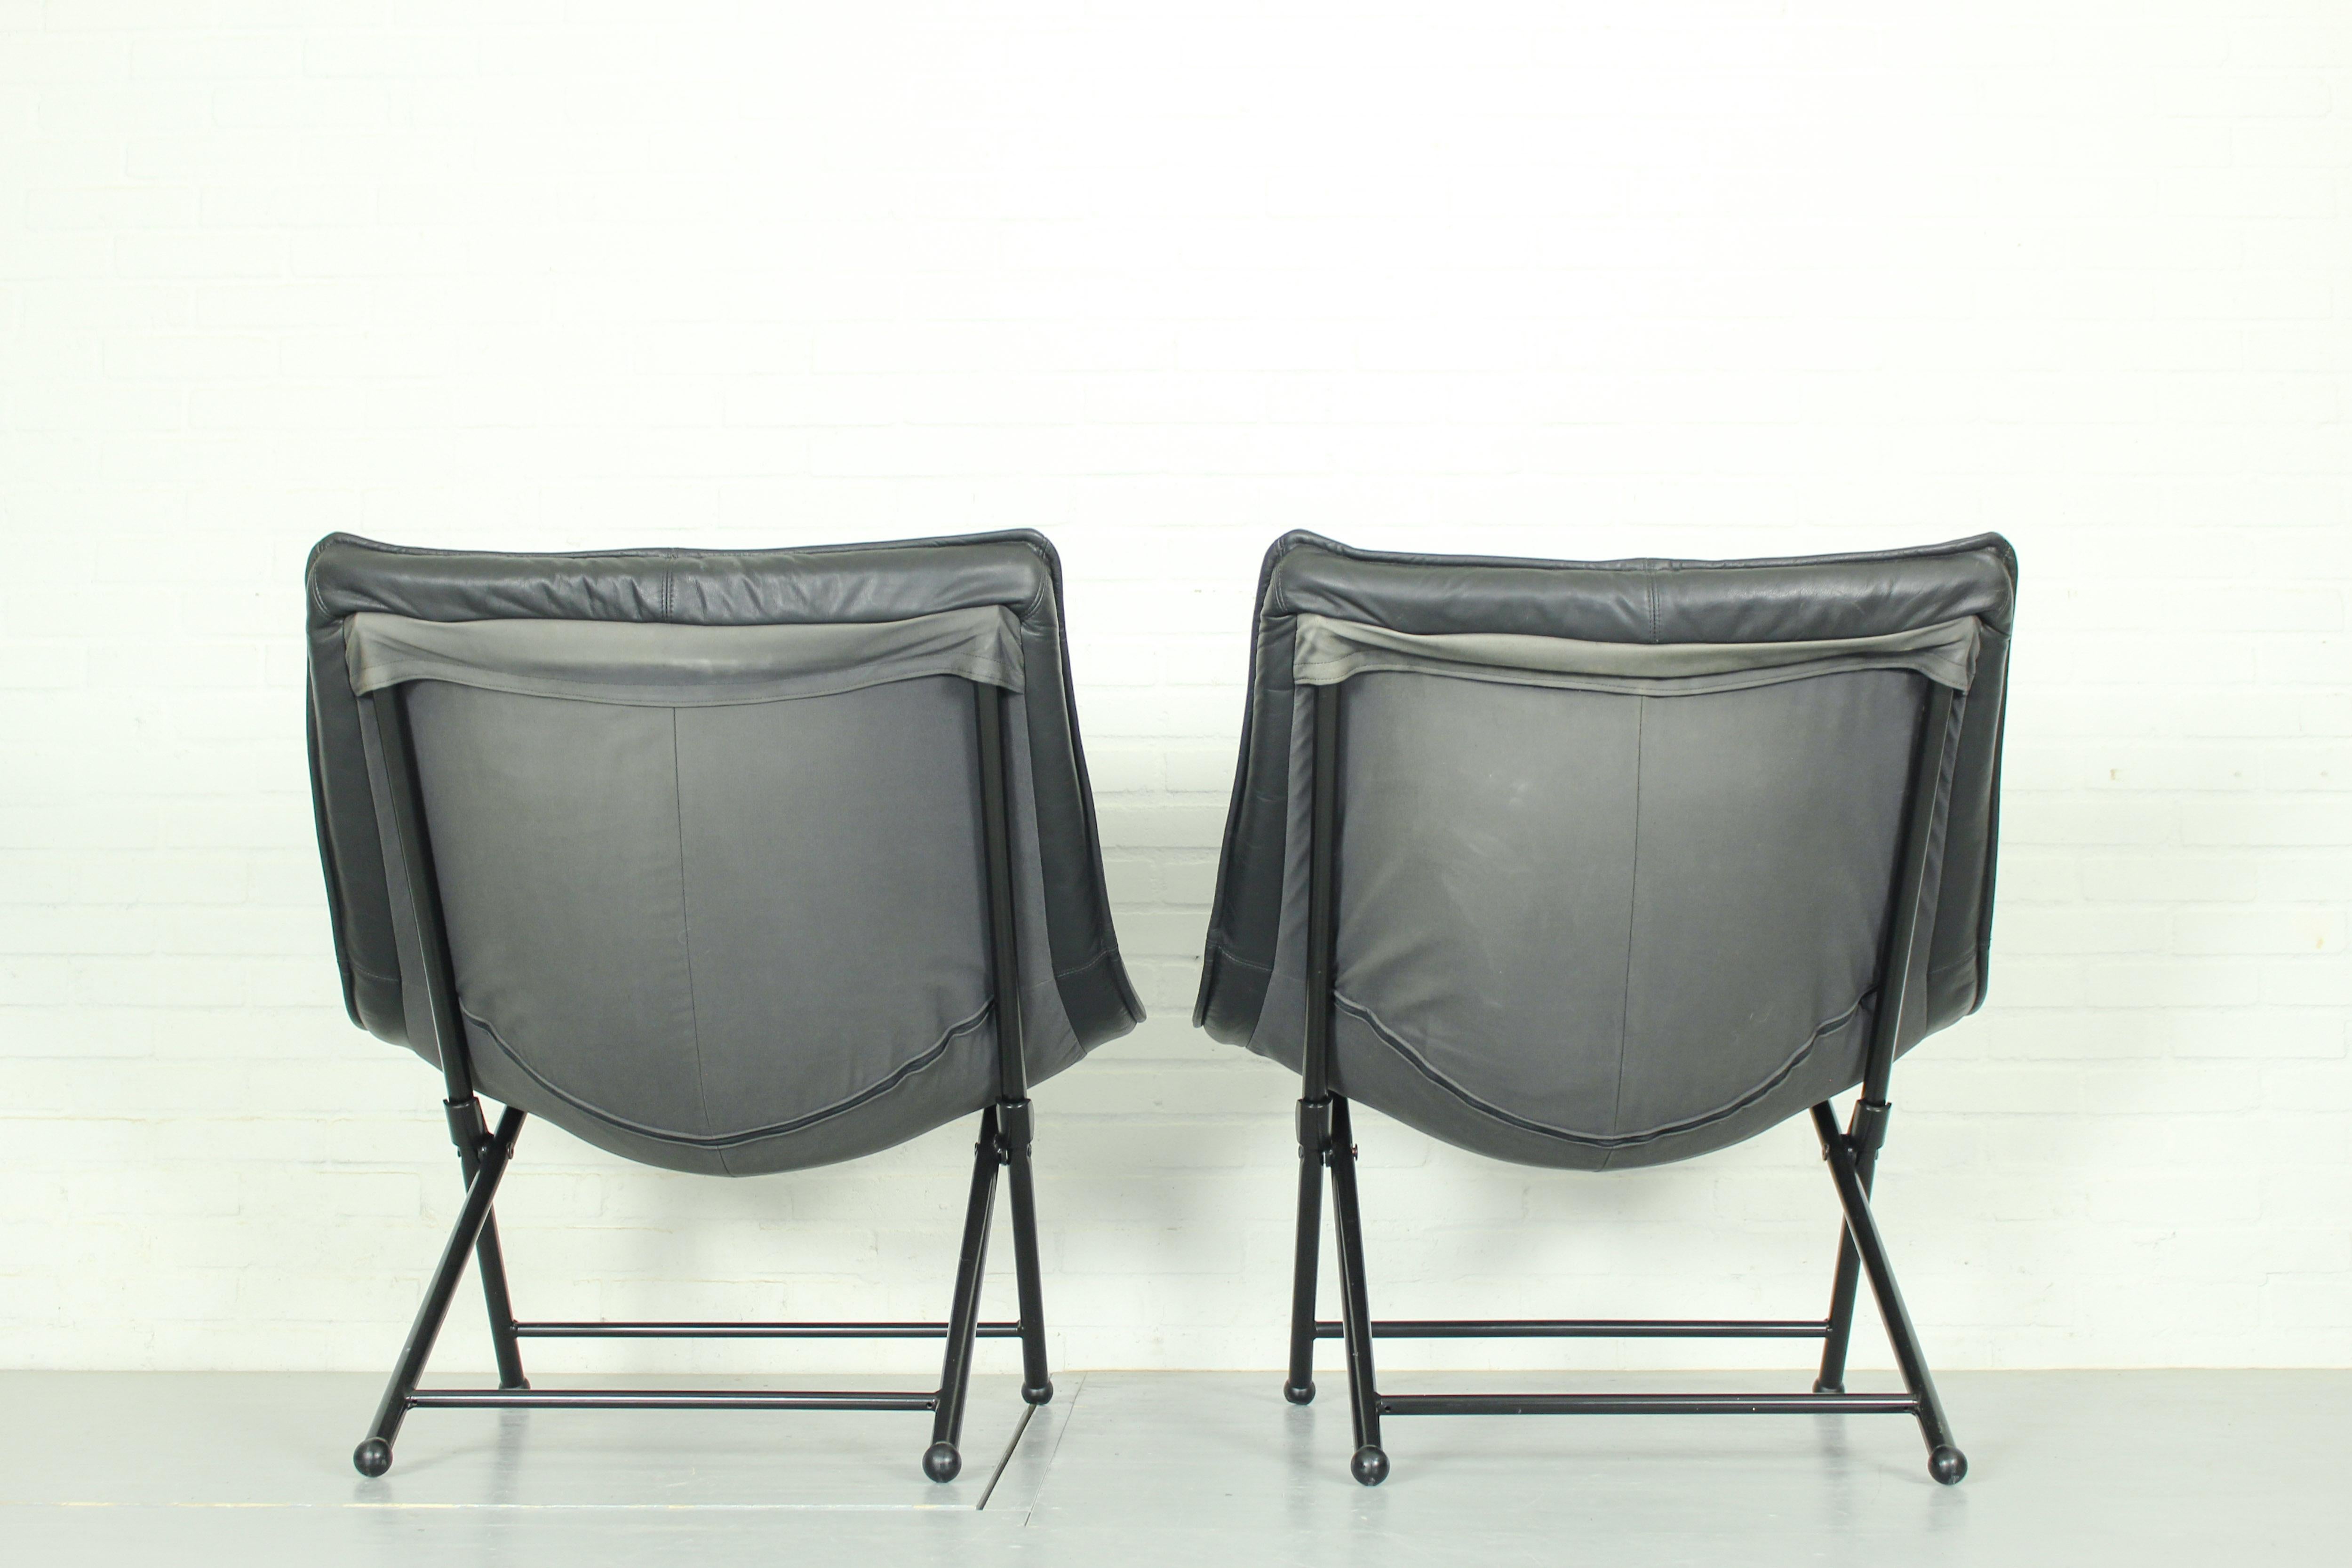 Italian Folding Lounge Chairs in Black Leather by Teun Van Zanten for Molinari, 1970s For Sale